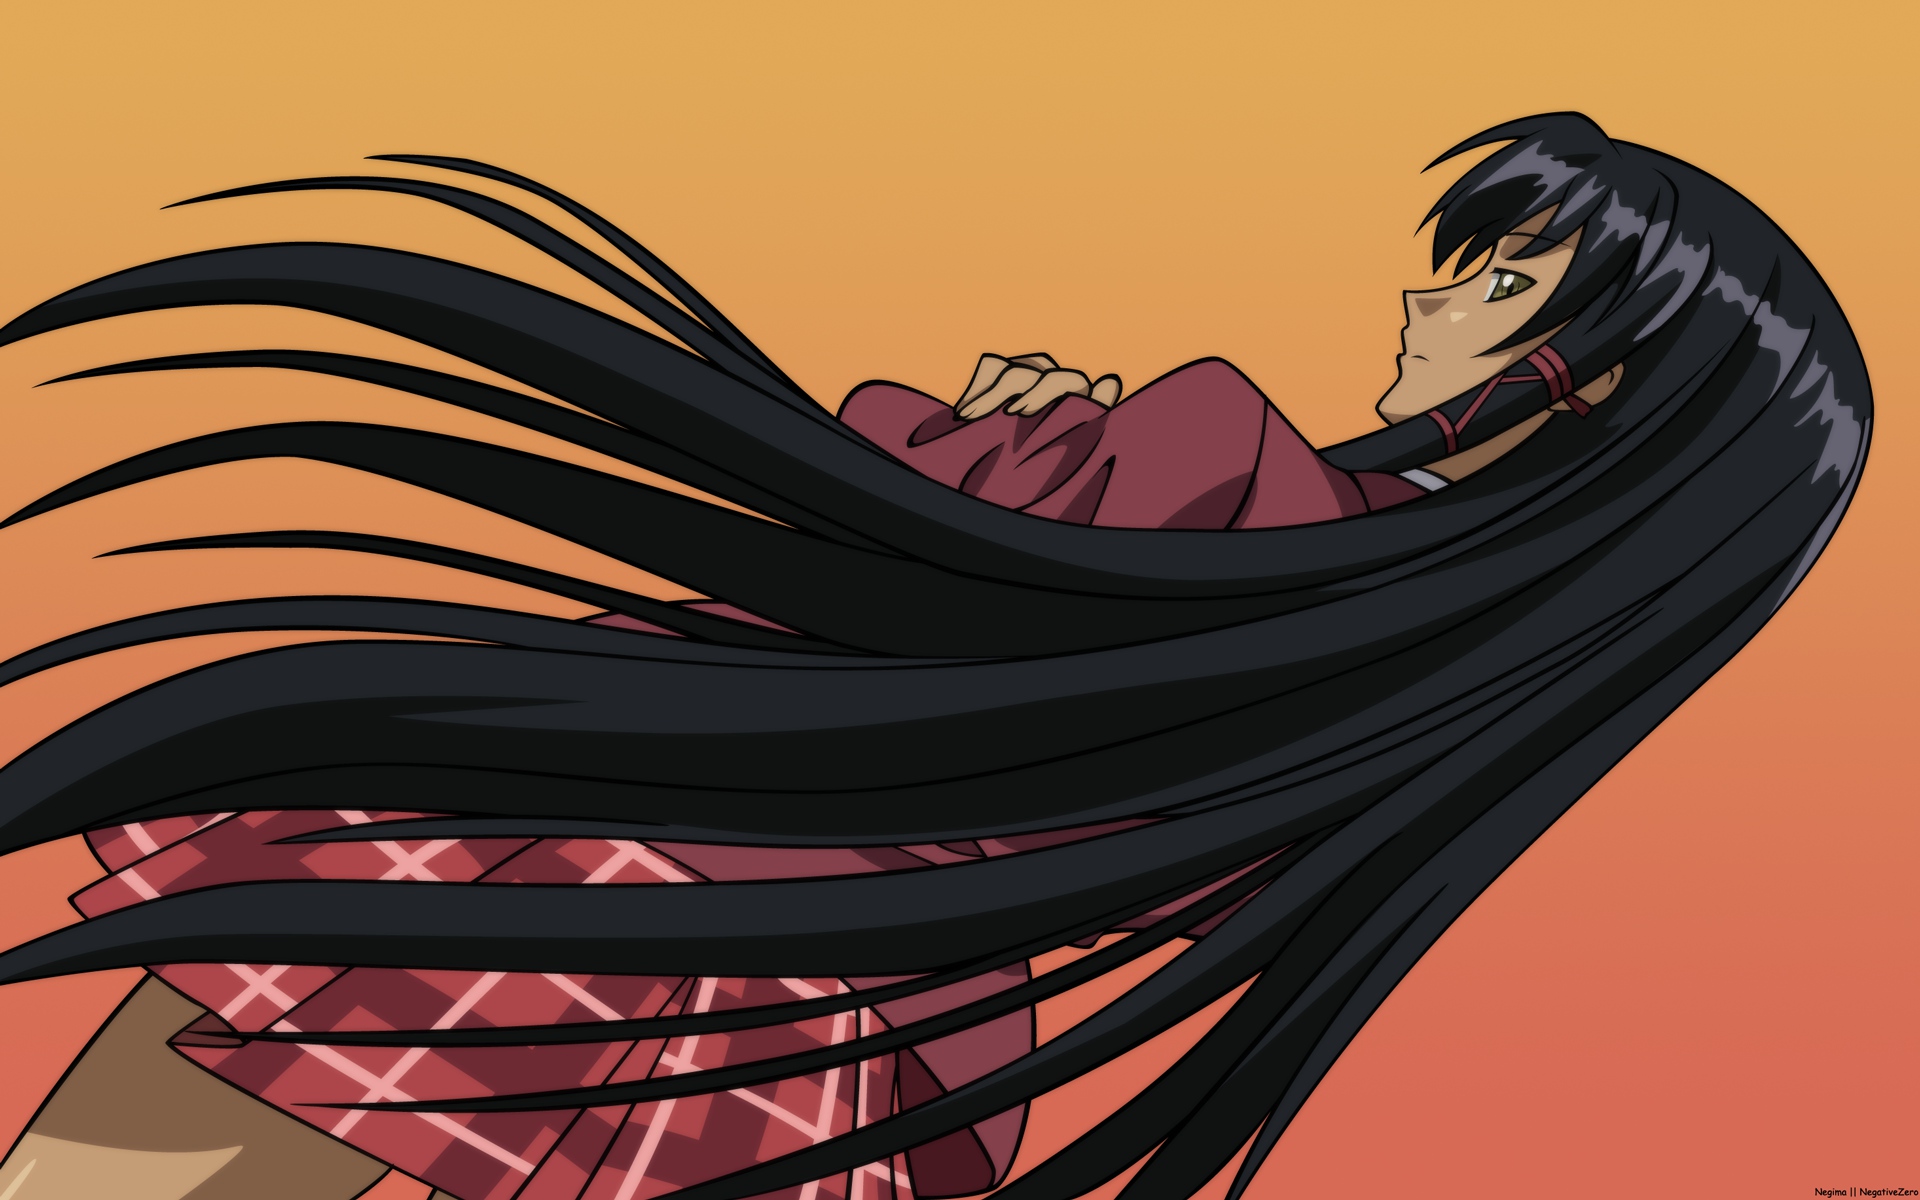 Anime school scene with characters from School Rumble